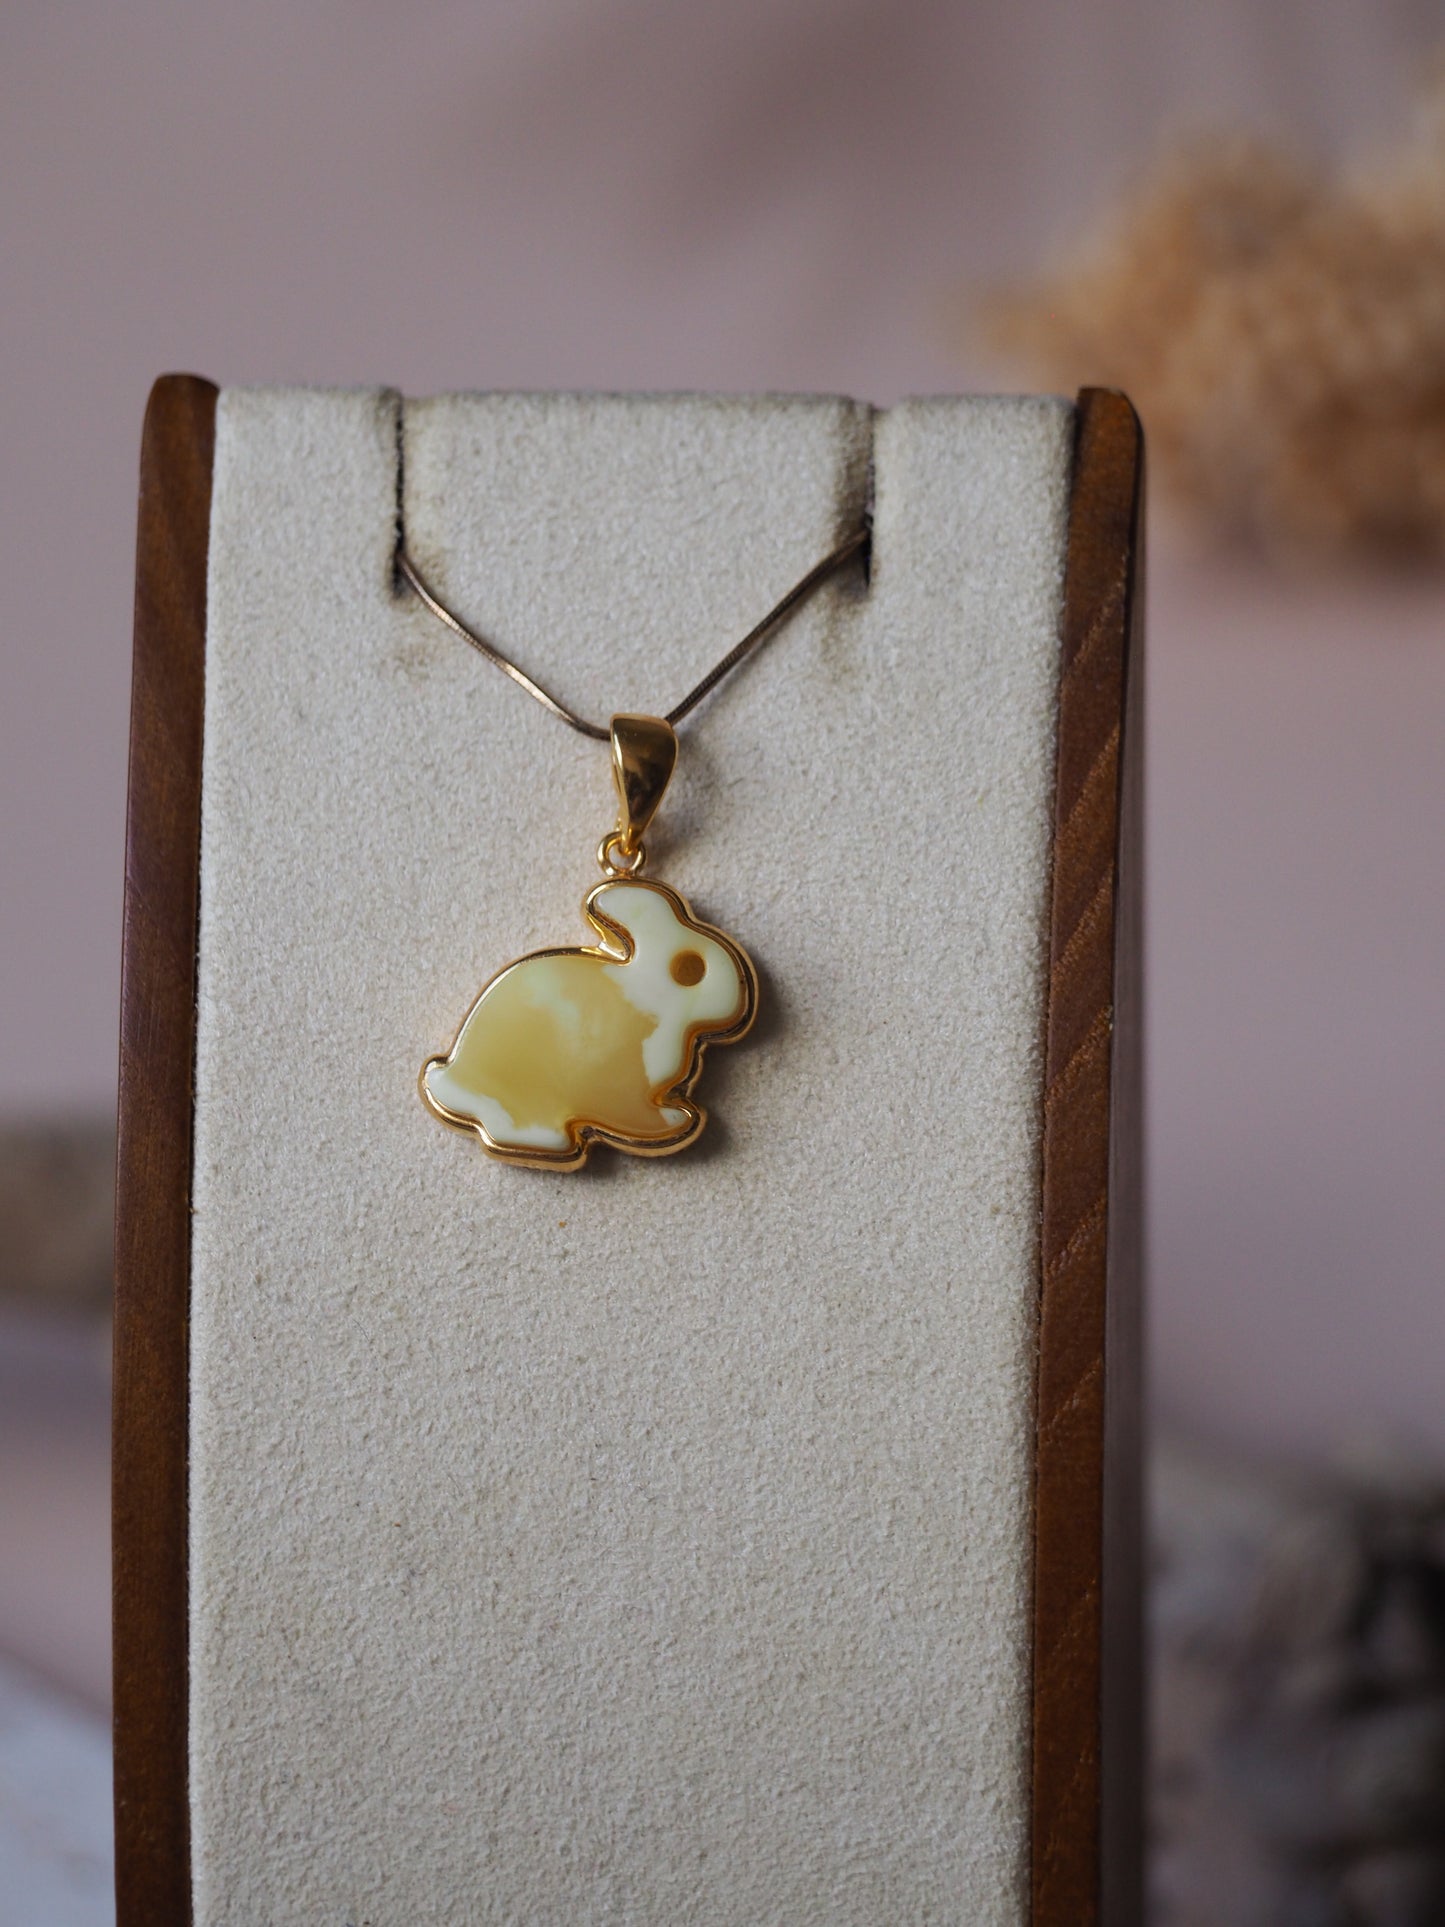 Milk/ Butterscotch Amber Rabbit Charm/ Pendant in Gold Pleated Silver